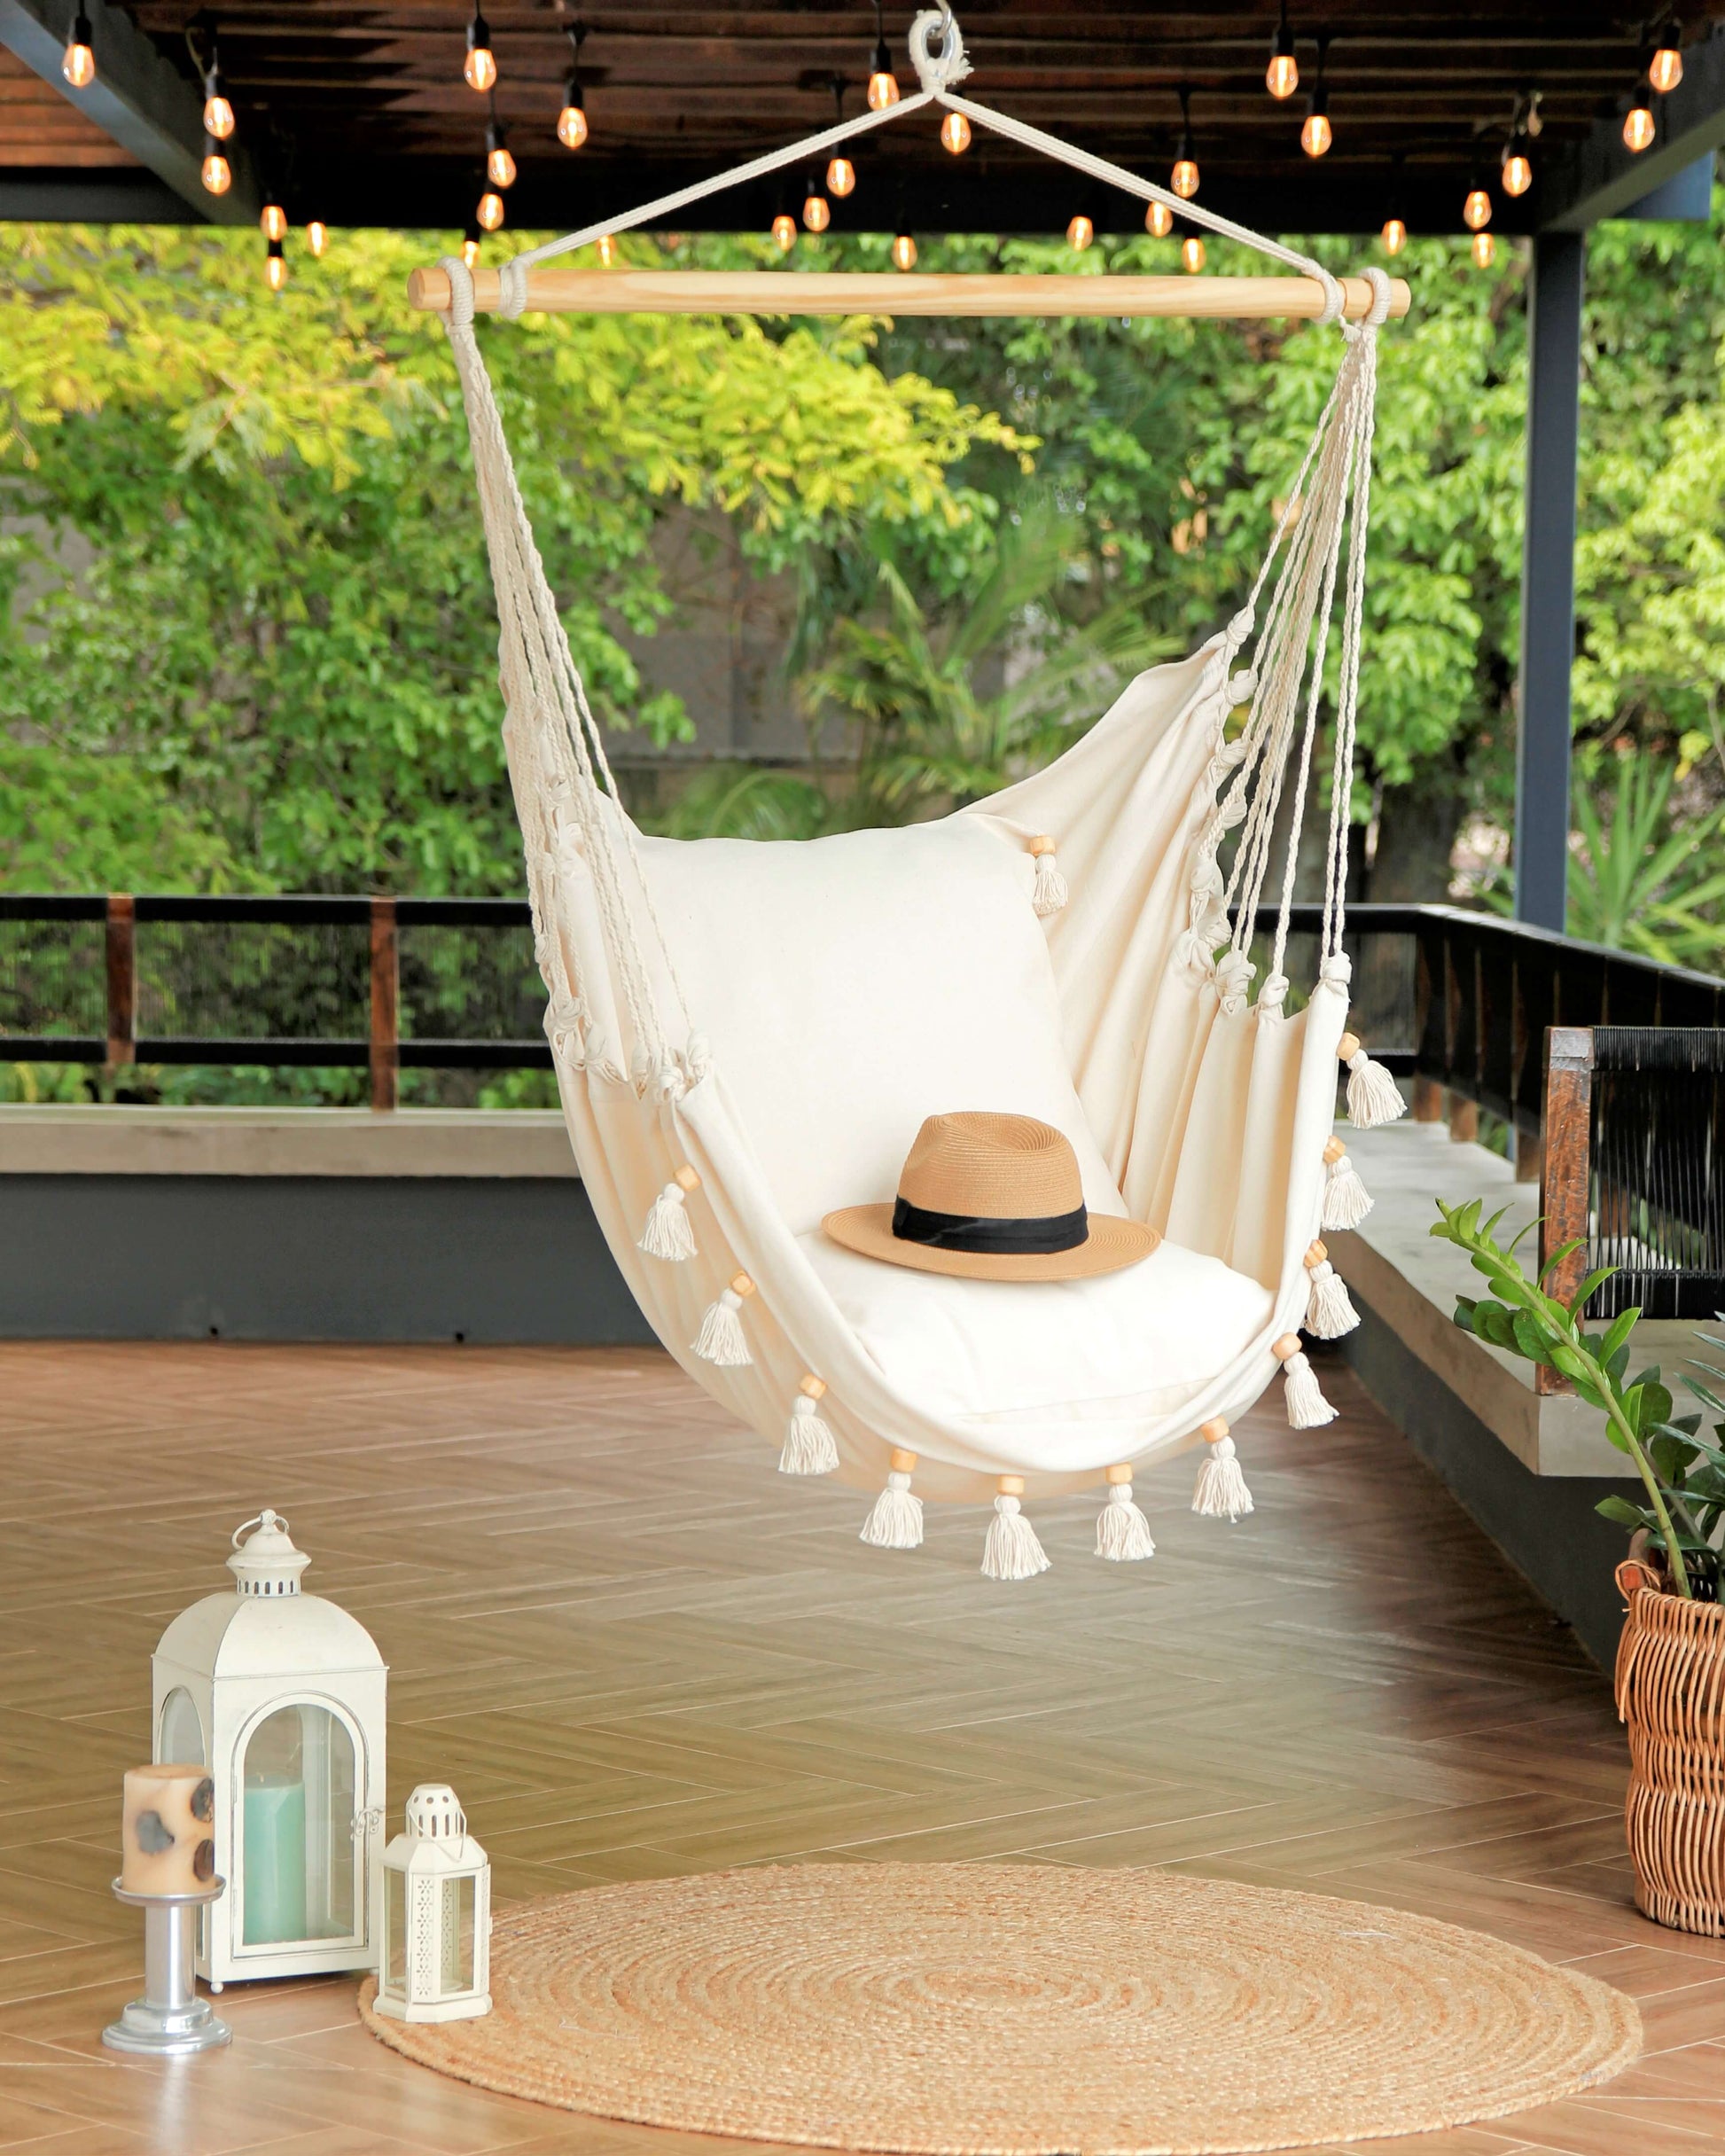 Boho Hammock Chair With Tassels in a porch with jute rug 